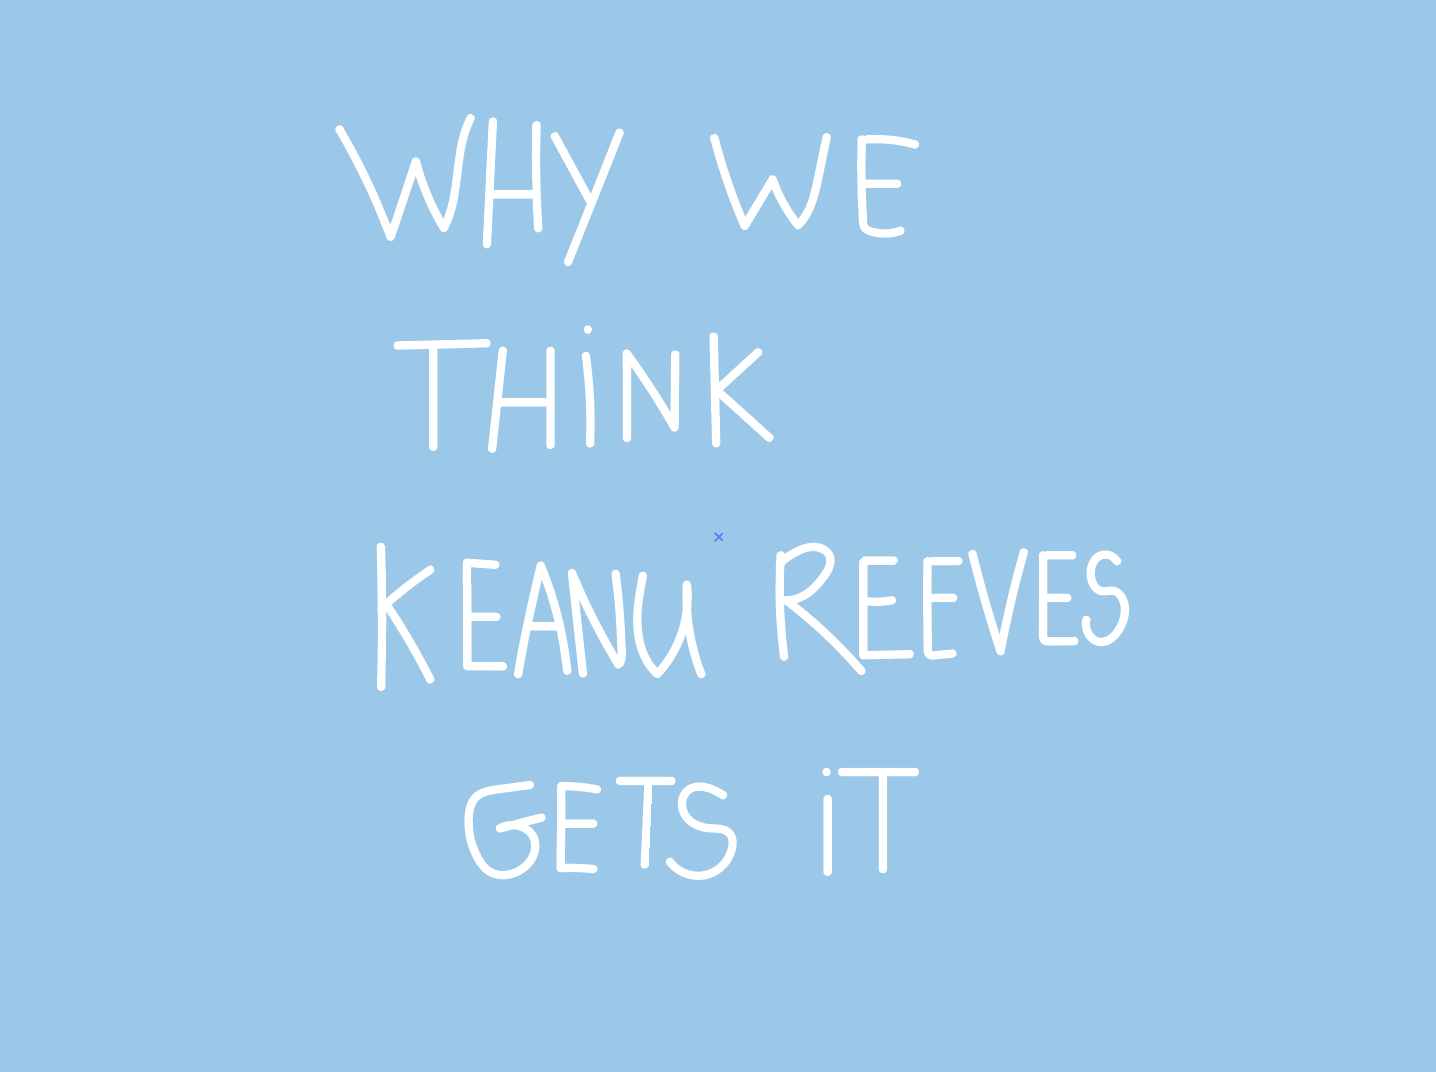 Why we think Keanu Reeves gets it - The Proper Label ®